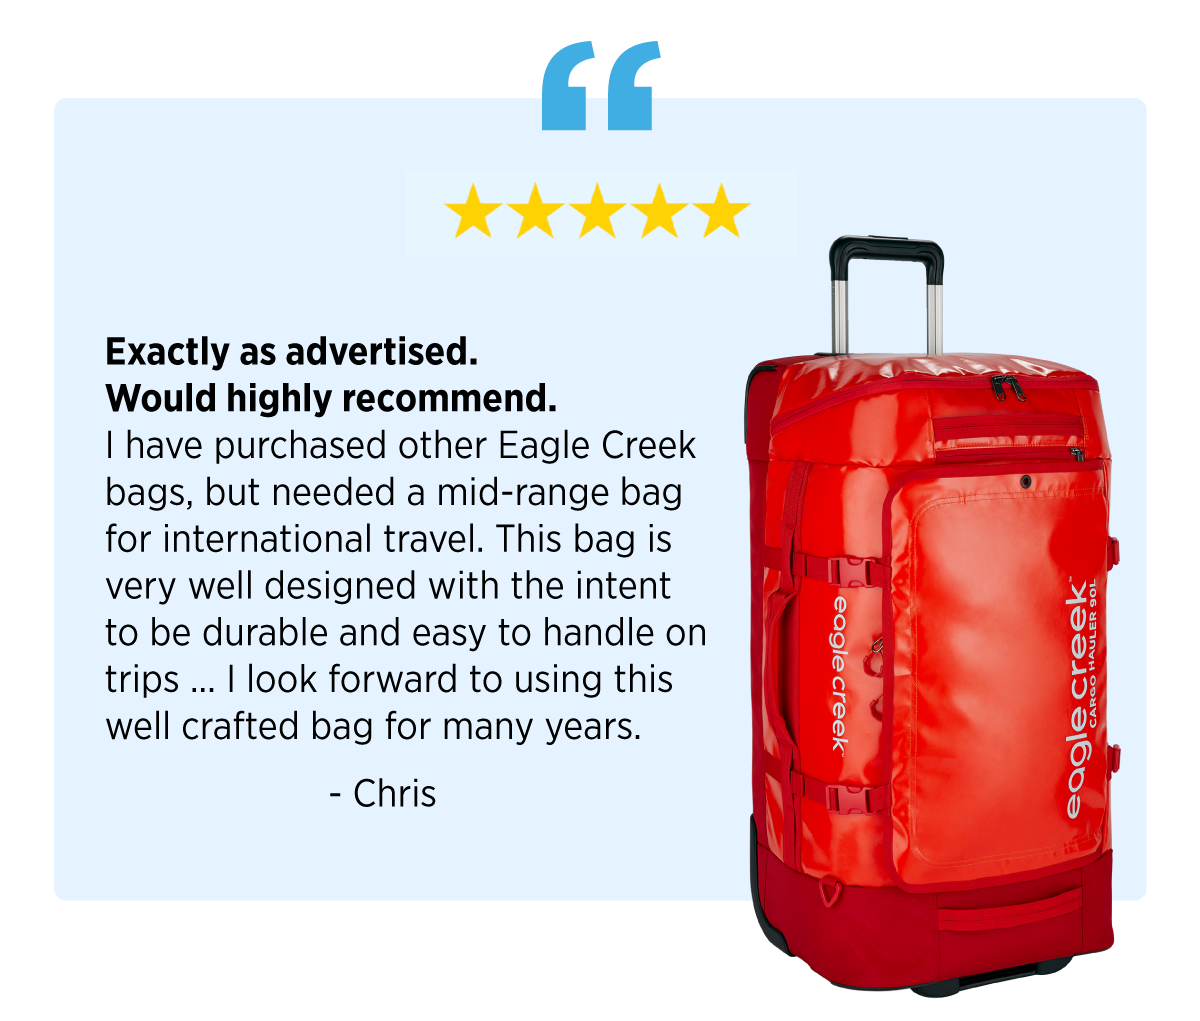 Quote: "Exactly as advertised. Would highly recommend. I have purchased other Eagle Creek bags, but needed a mid-range bad for international travel. This bag is very well designed with the intent to be durable and easy to handle on trips ... I look forward to using this well crafted bag for many years." - Chris